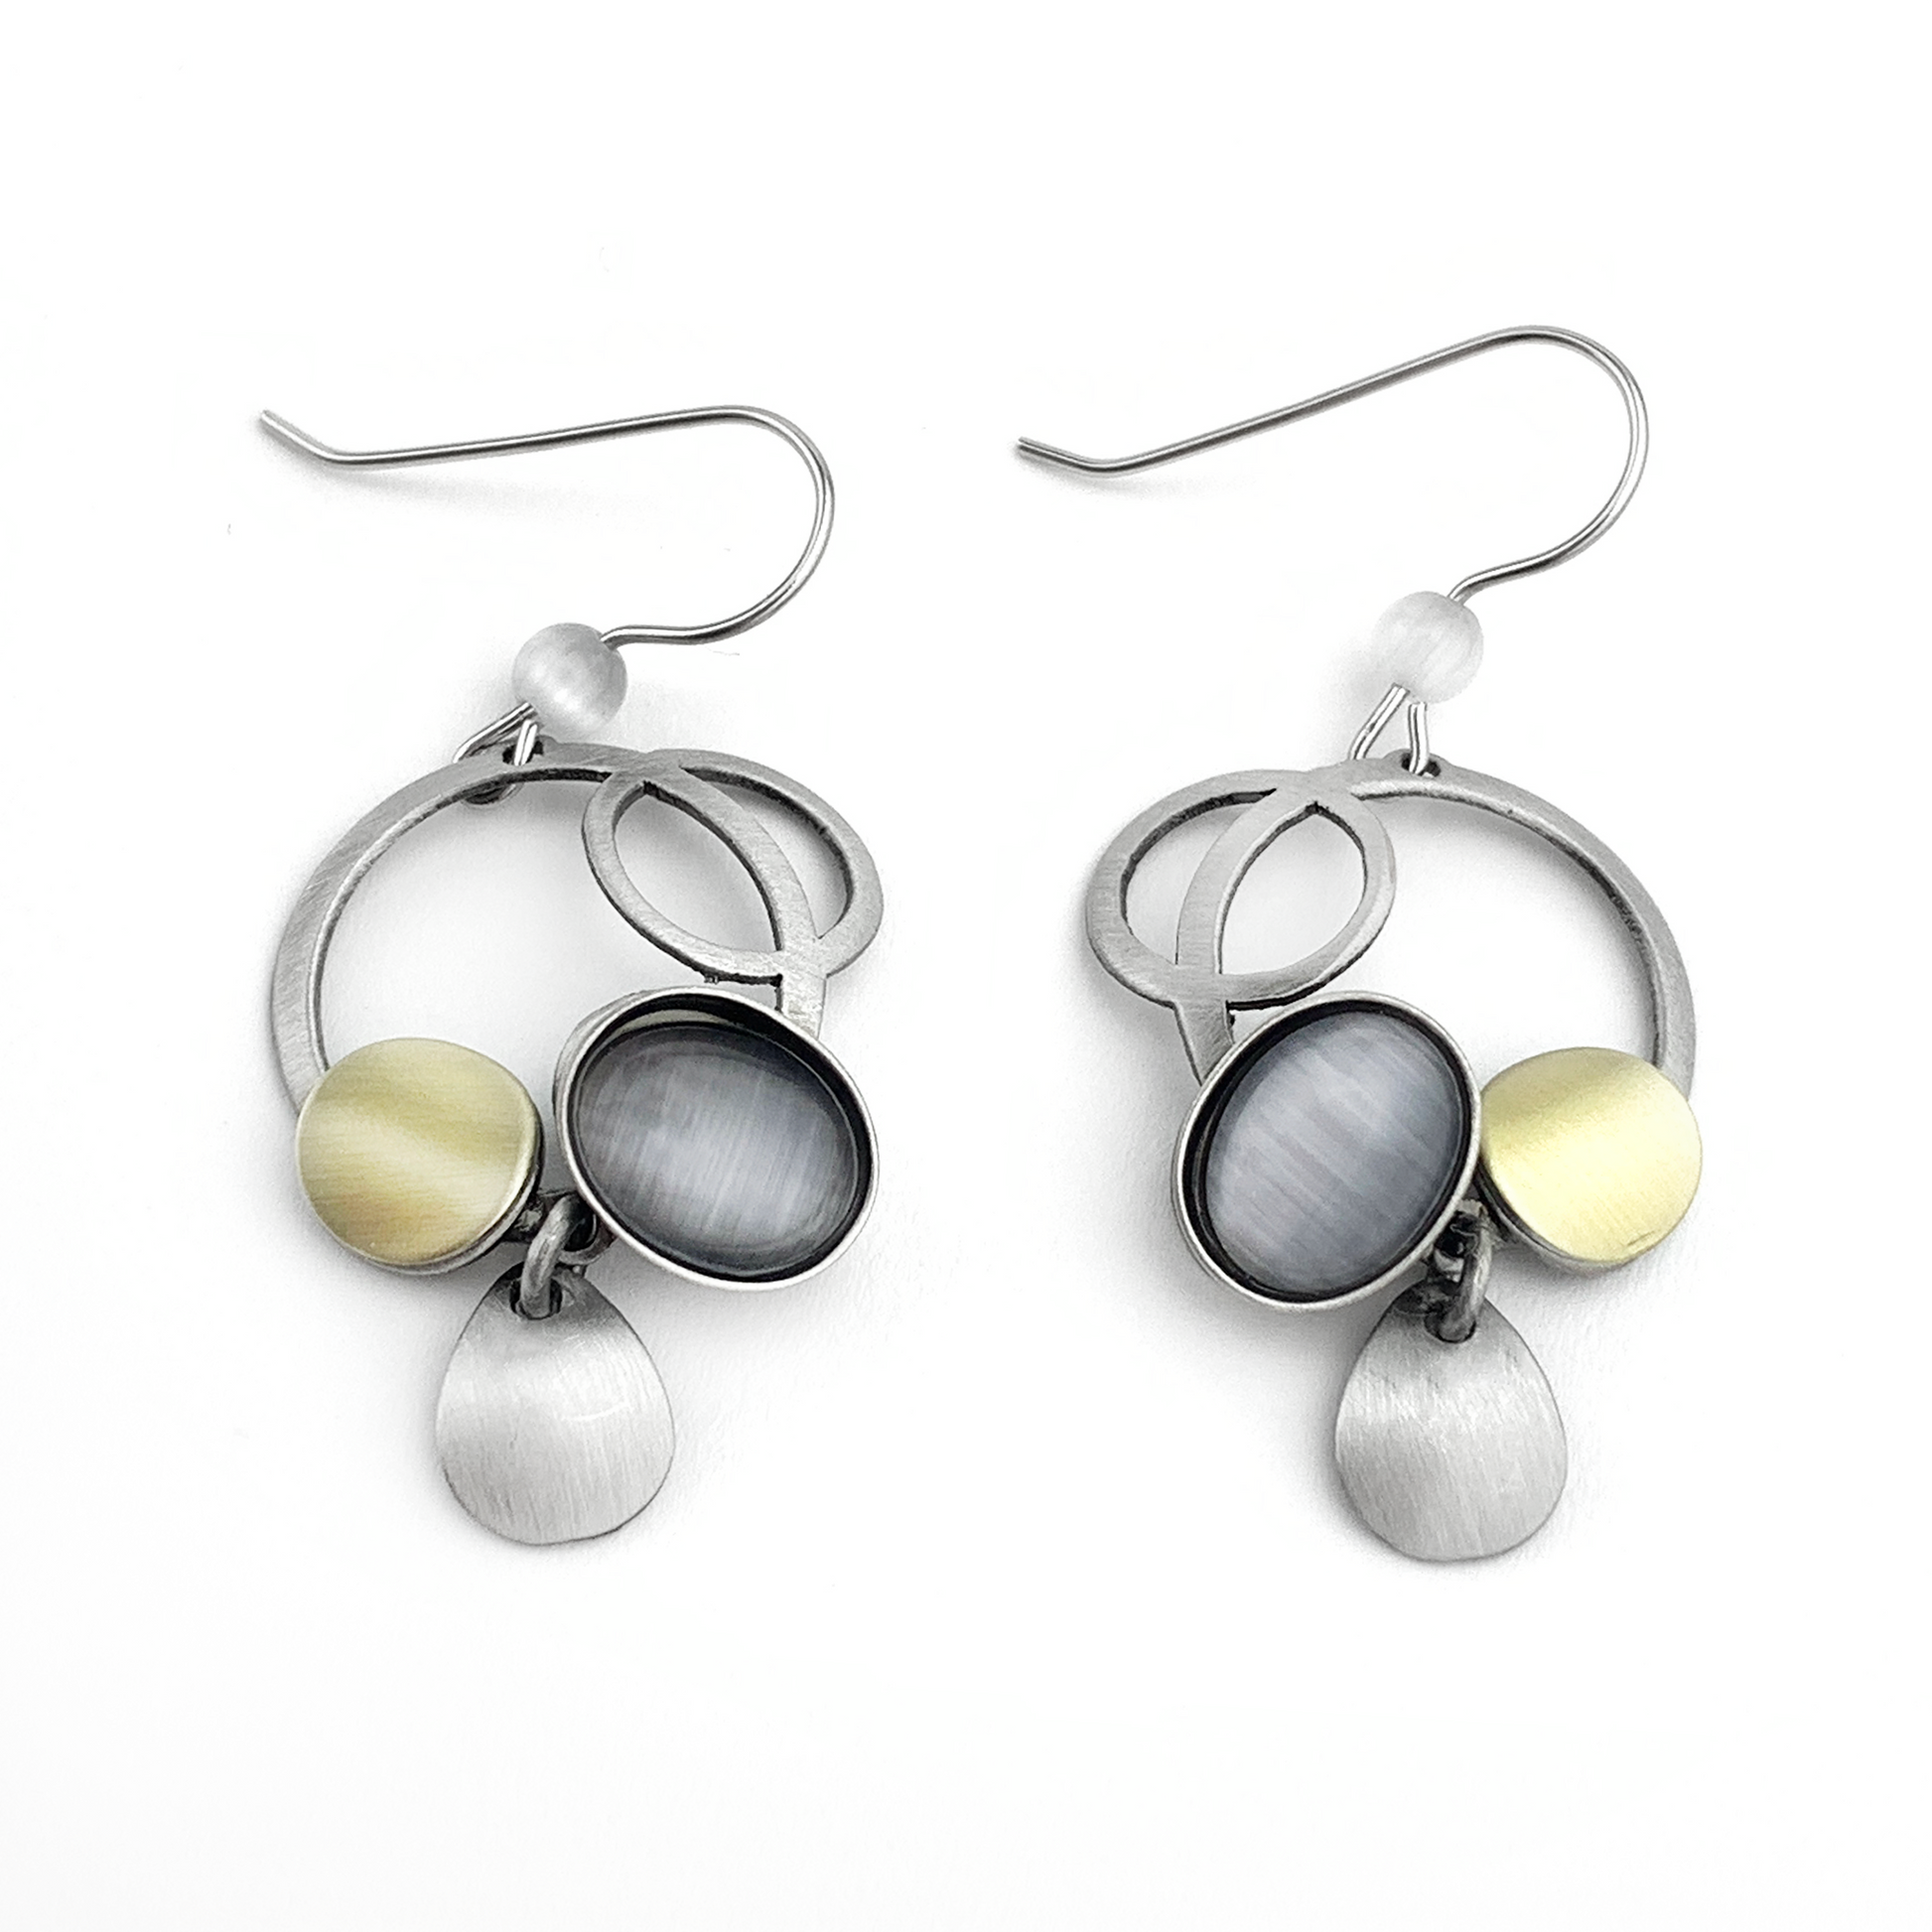 Crono Design French Hook Earrings With Grey Stone – New Morning Gallery